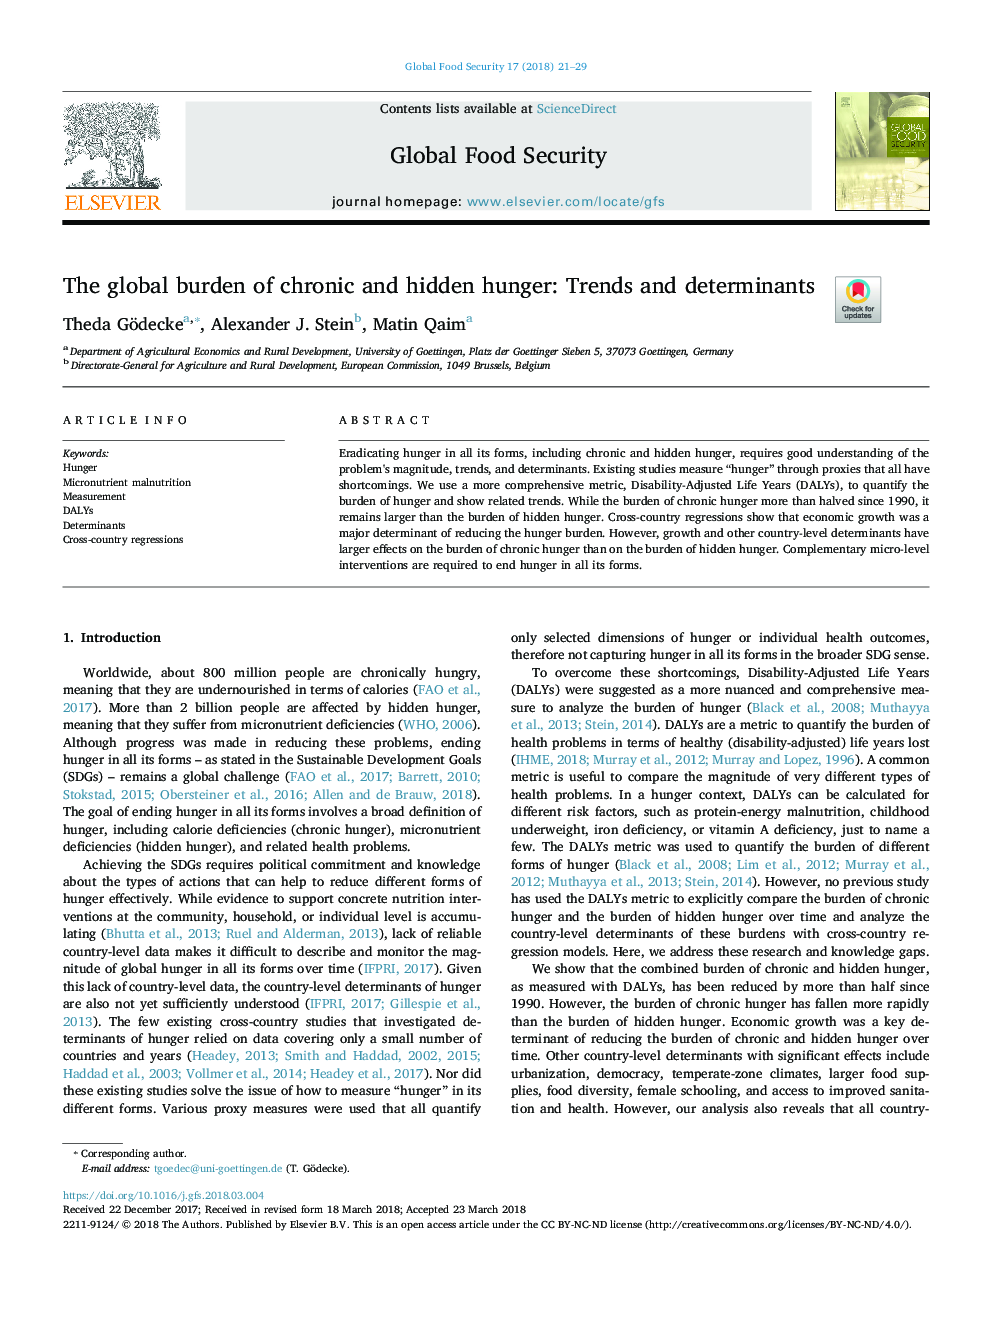 The global burden of chronic and hidden hunger: Trends and determinants